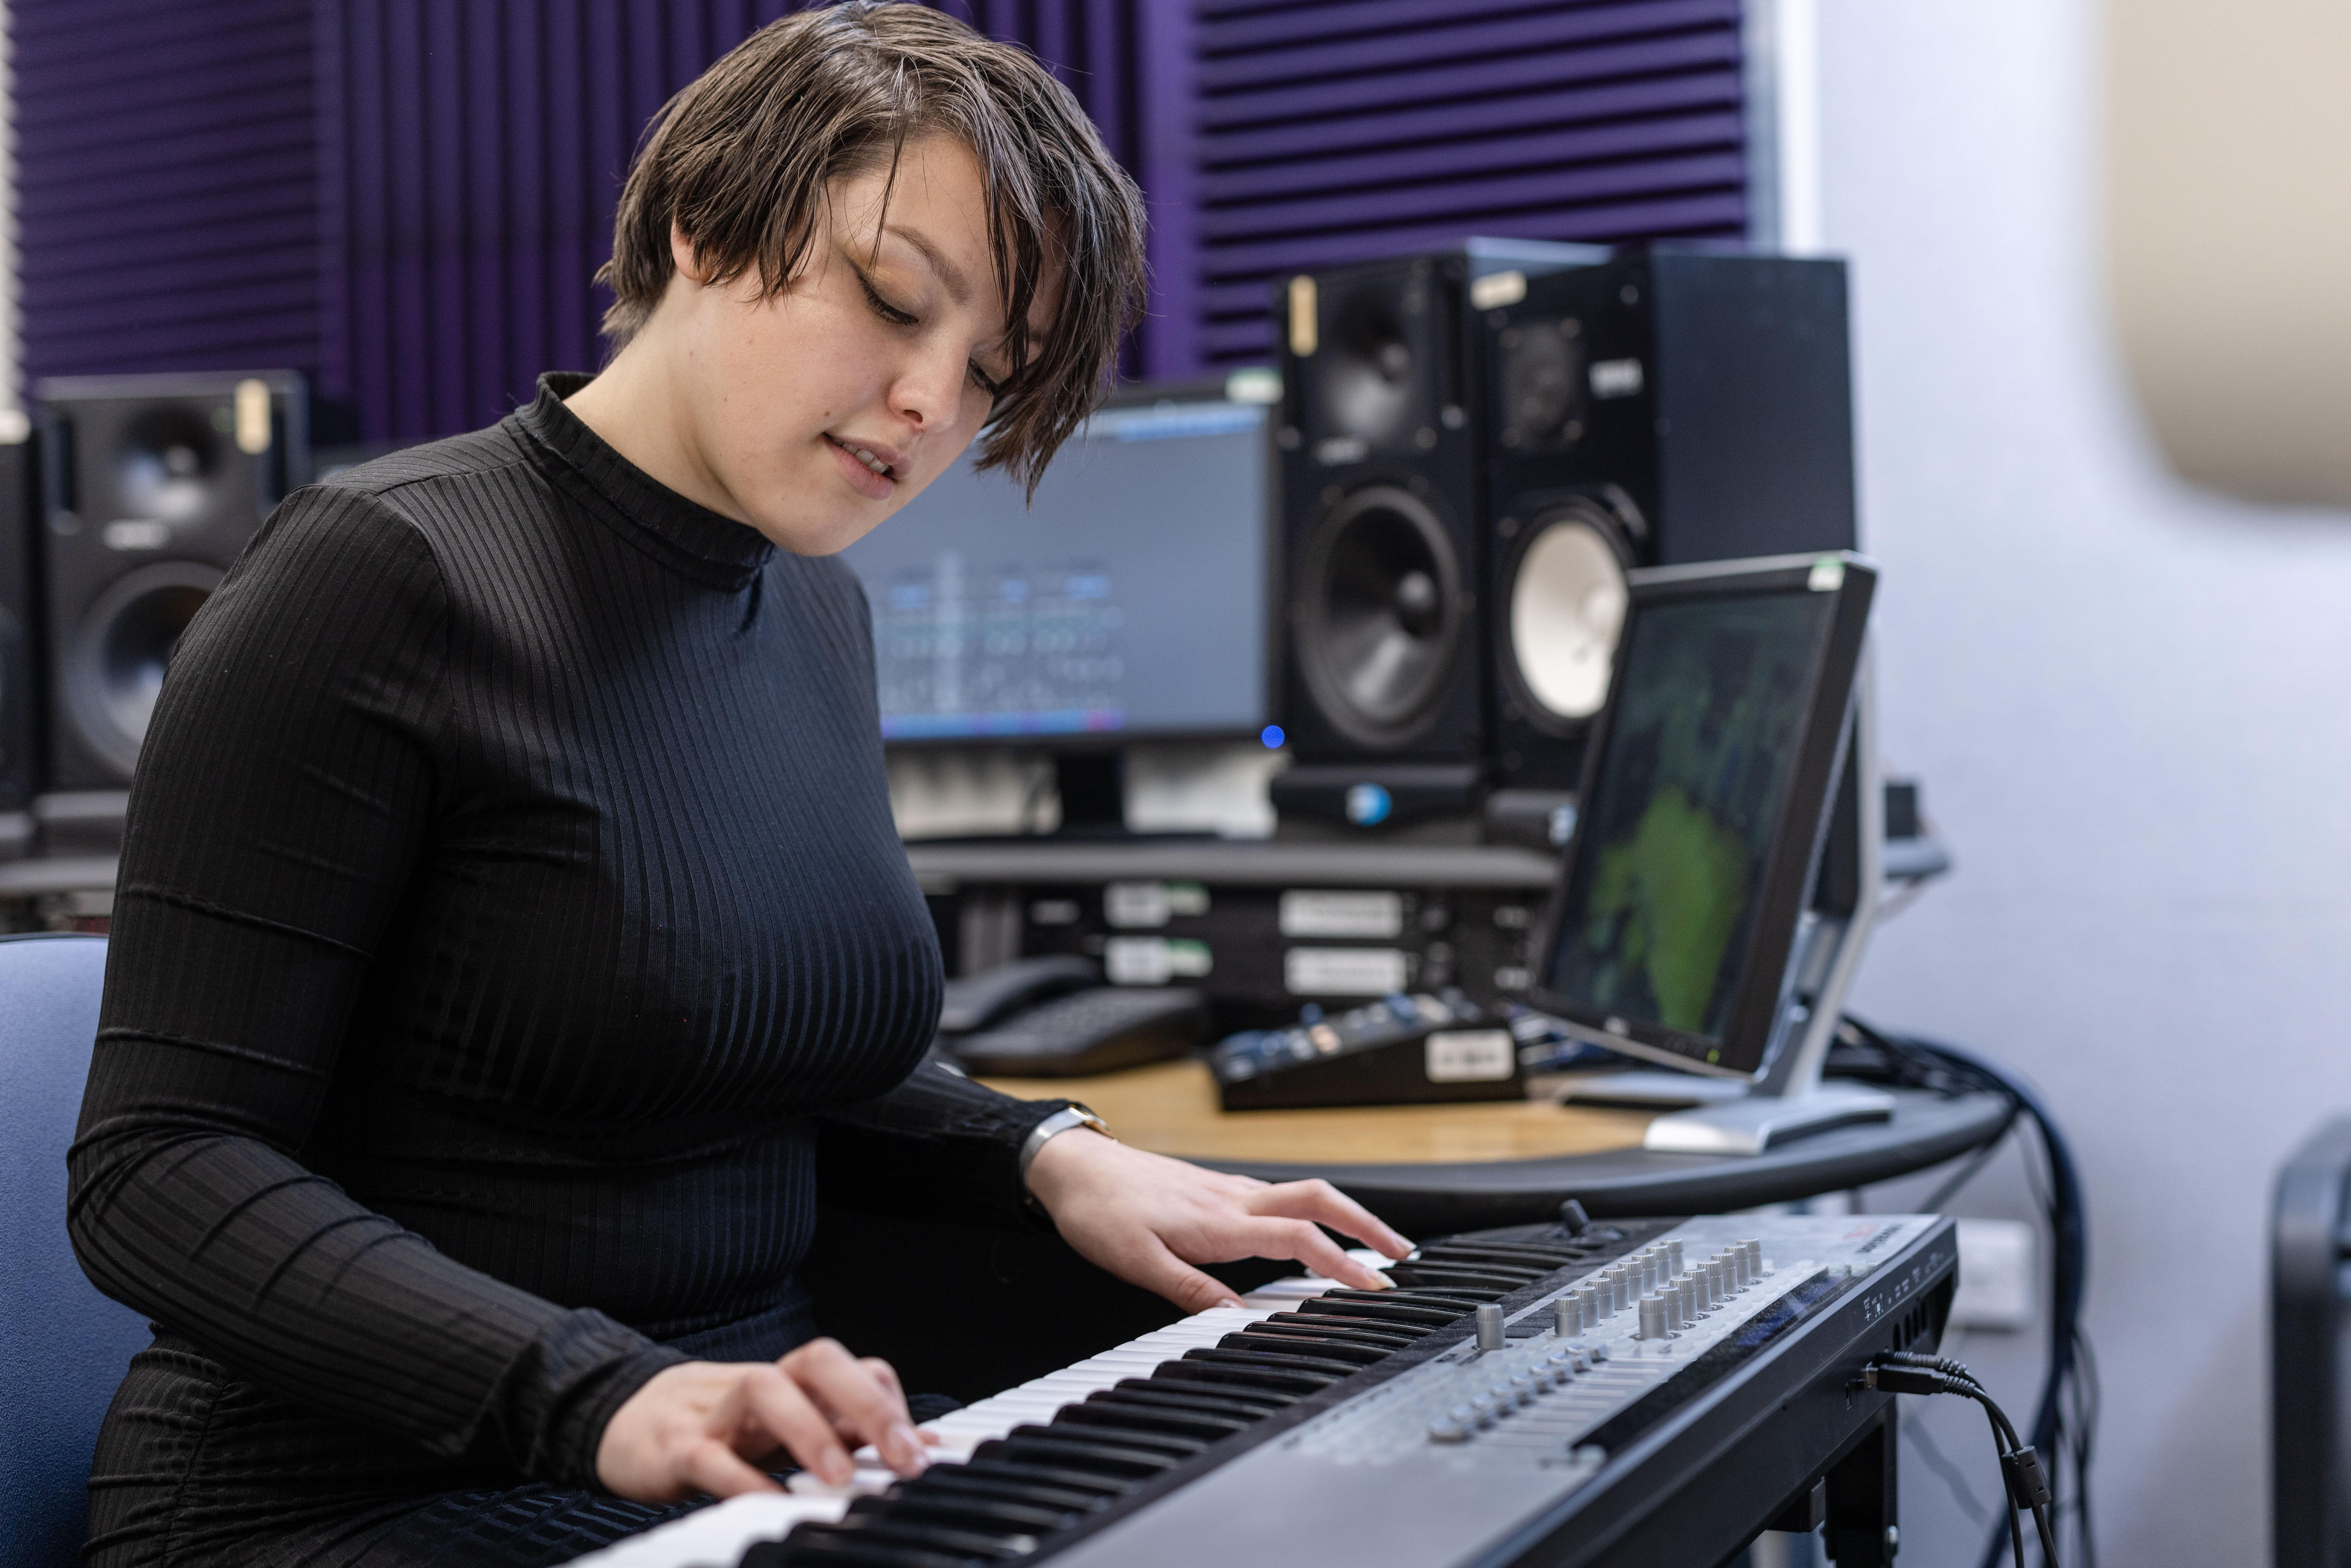 Student practicing on the keyboard in the electronic studios. In the background is a screen, speakers and other electronic equipment.